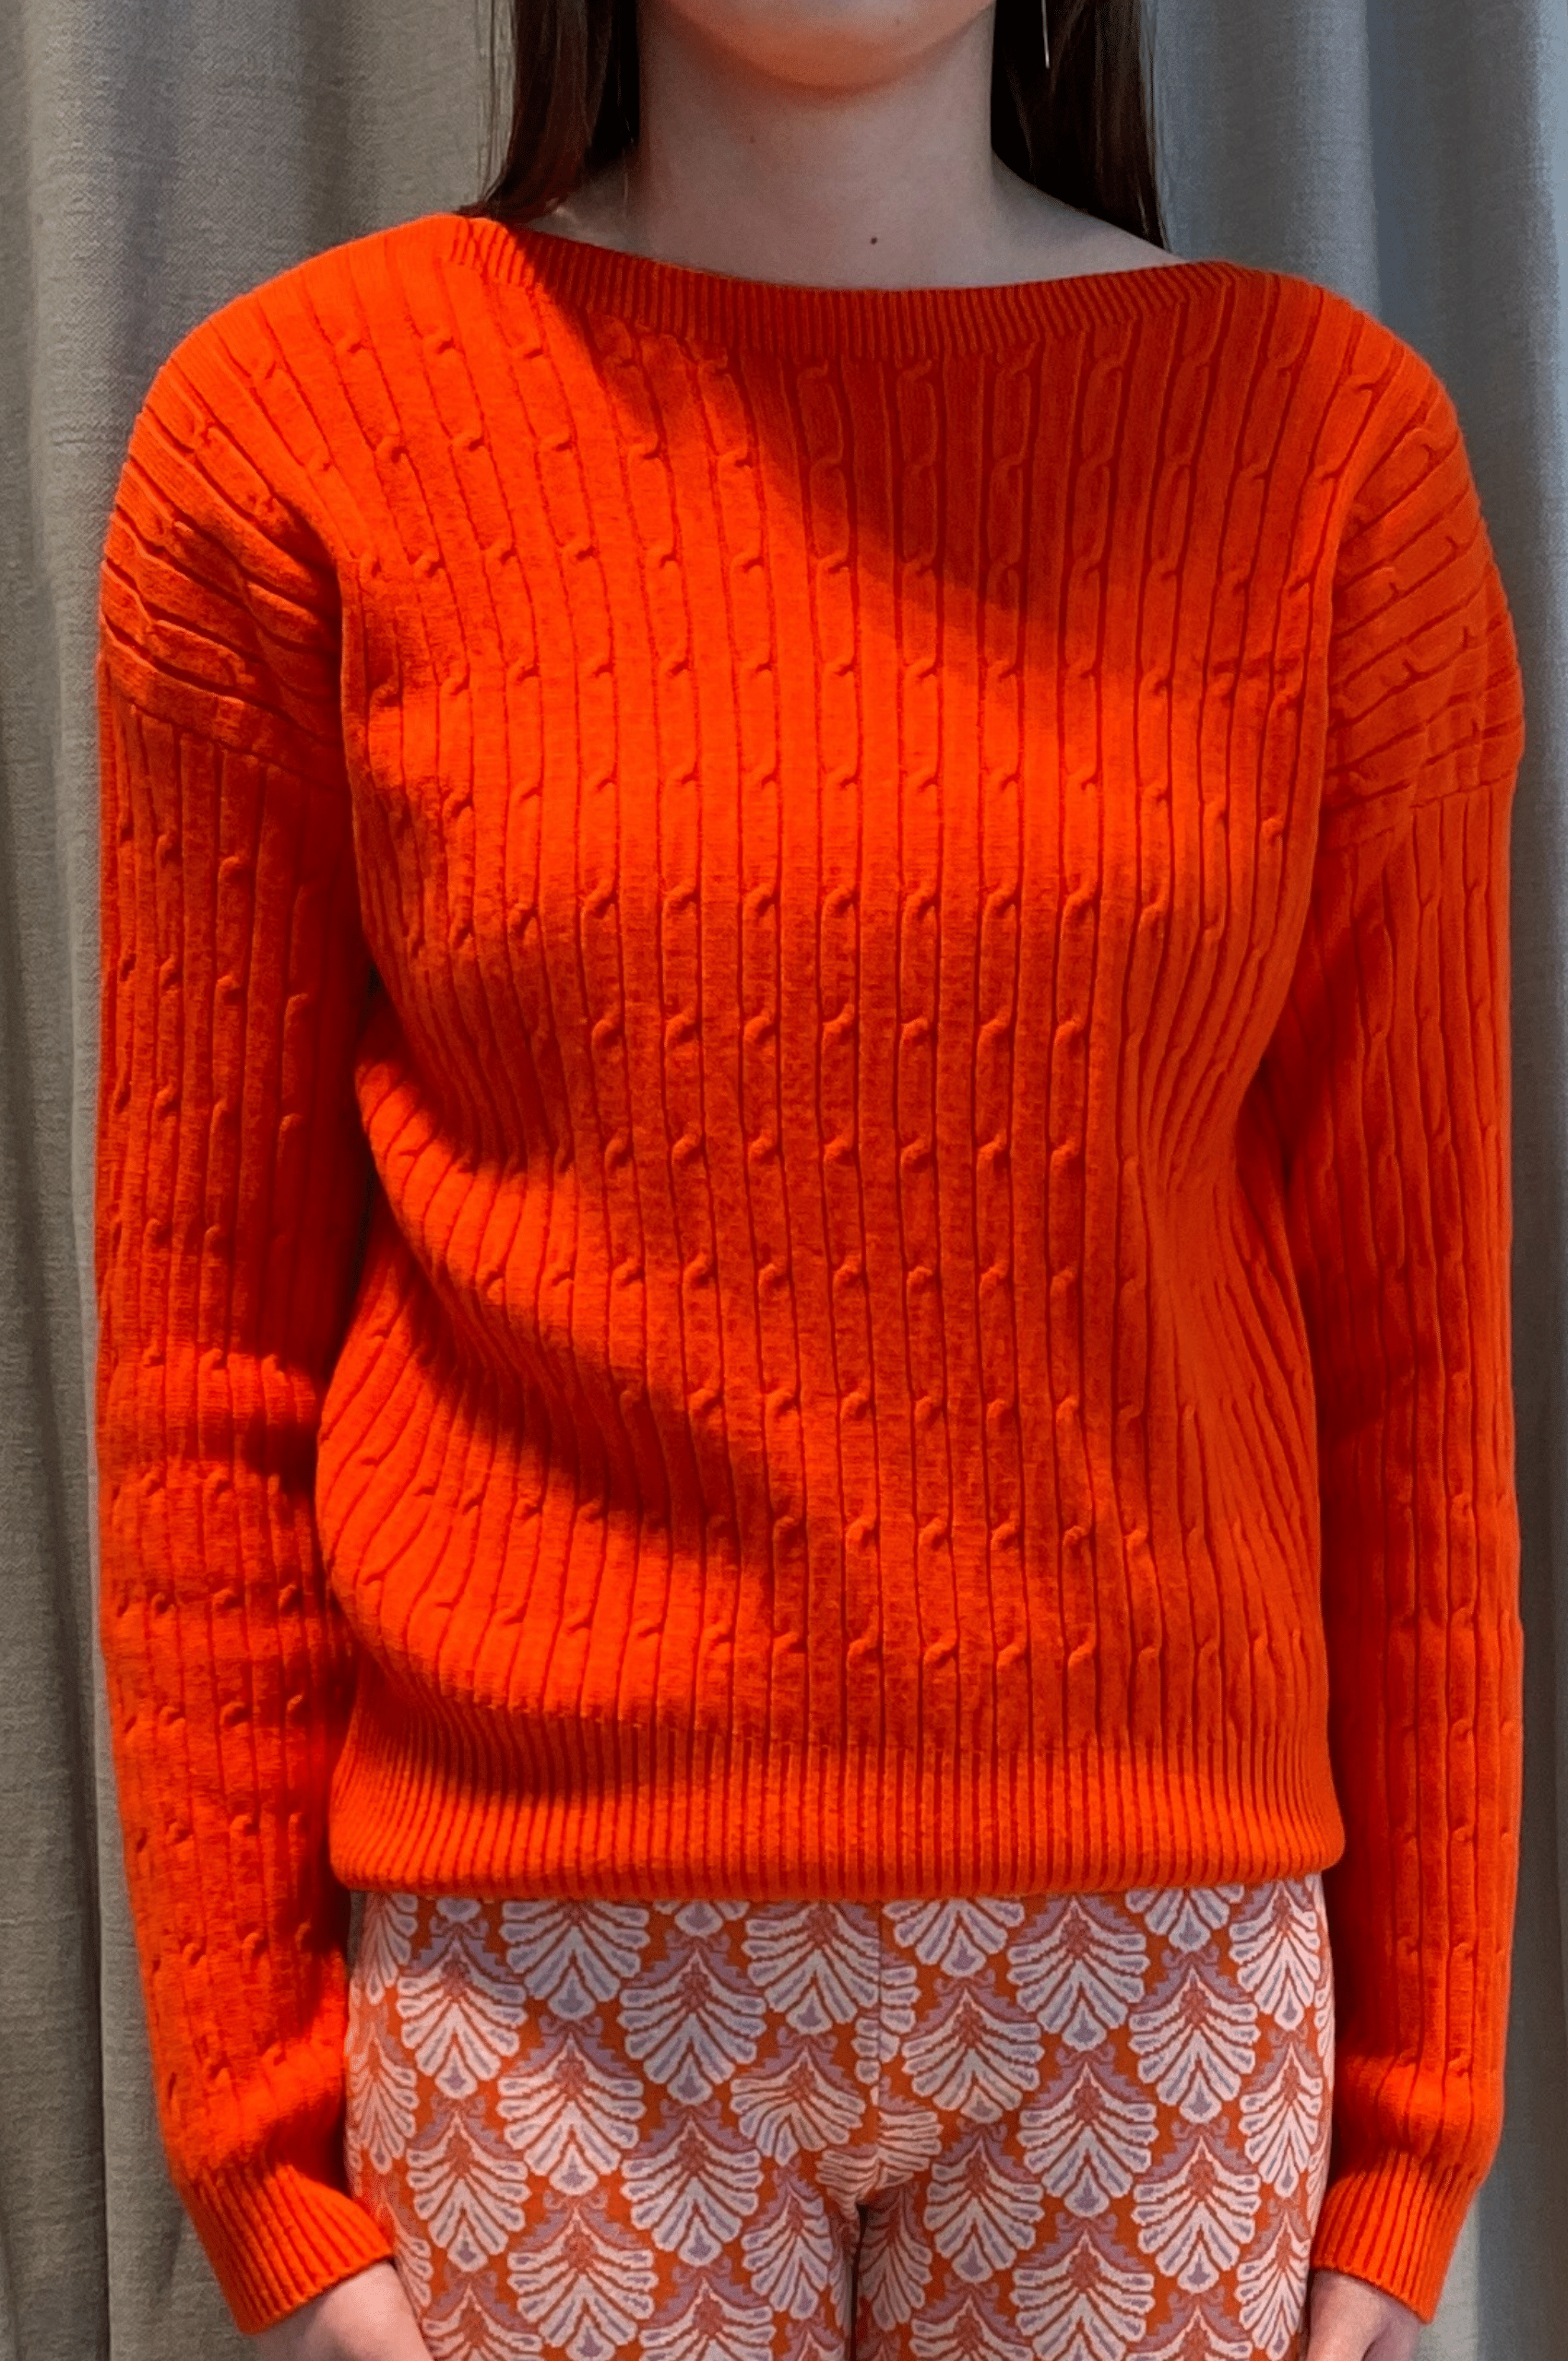 Image Pink Couture knitted sweater orange